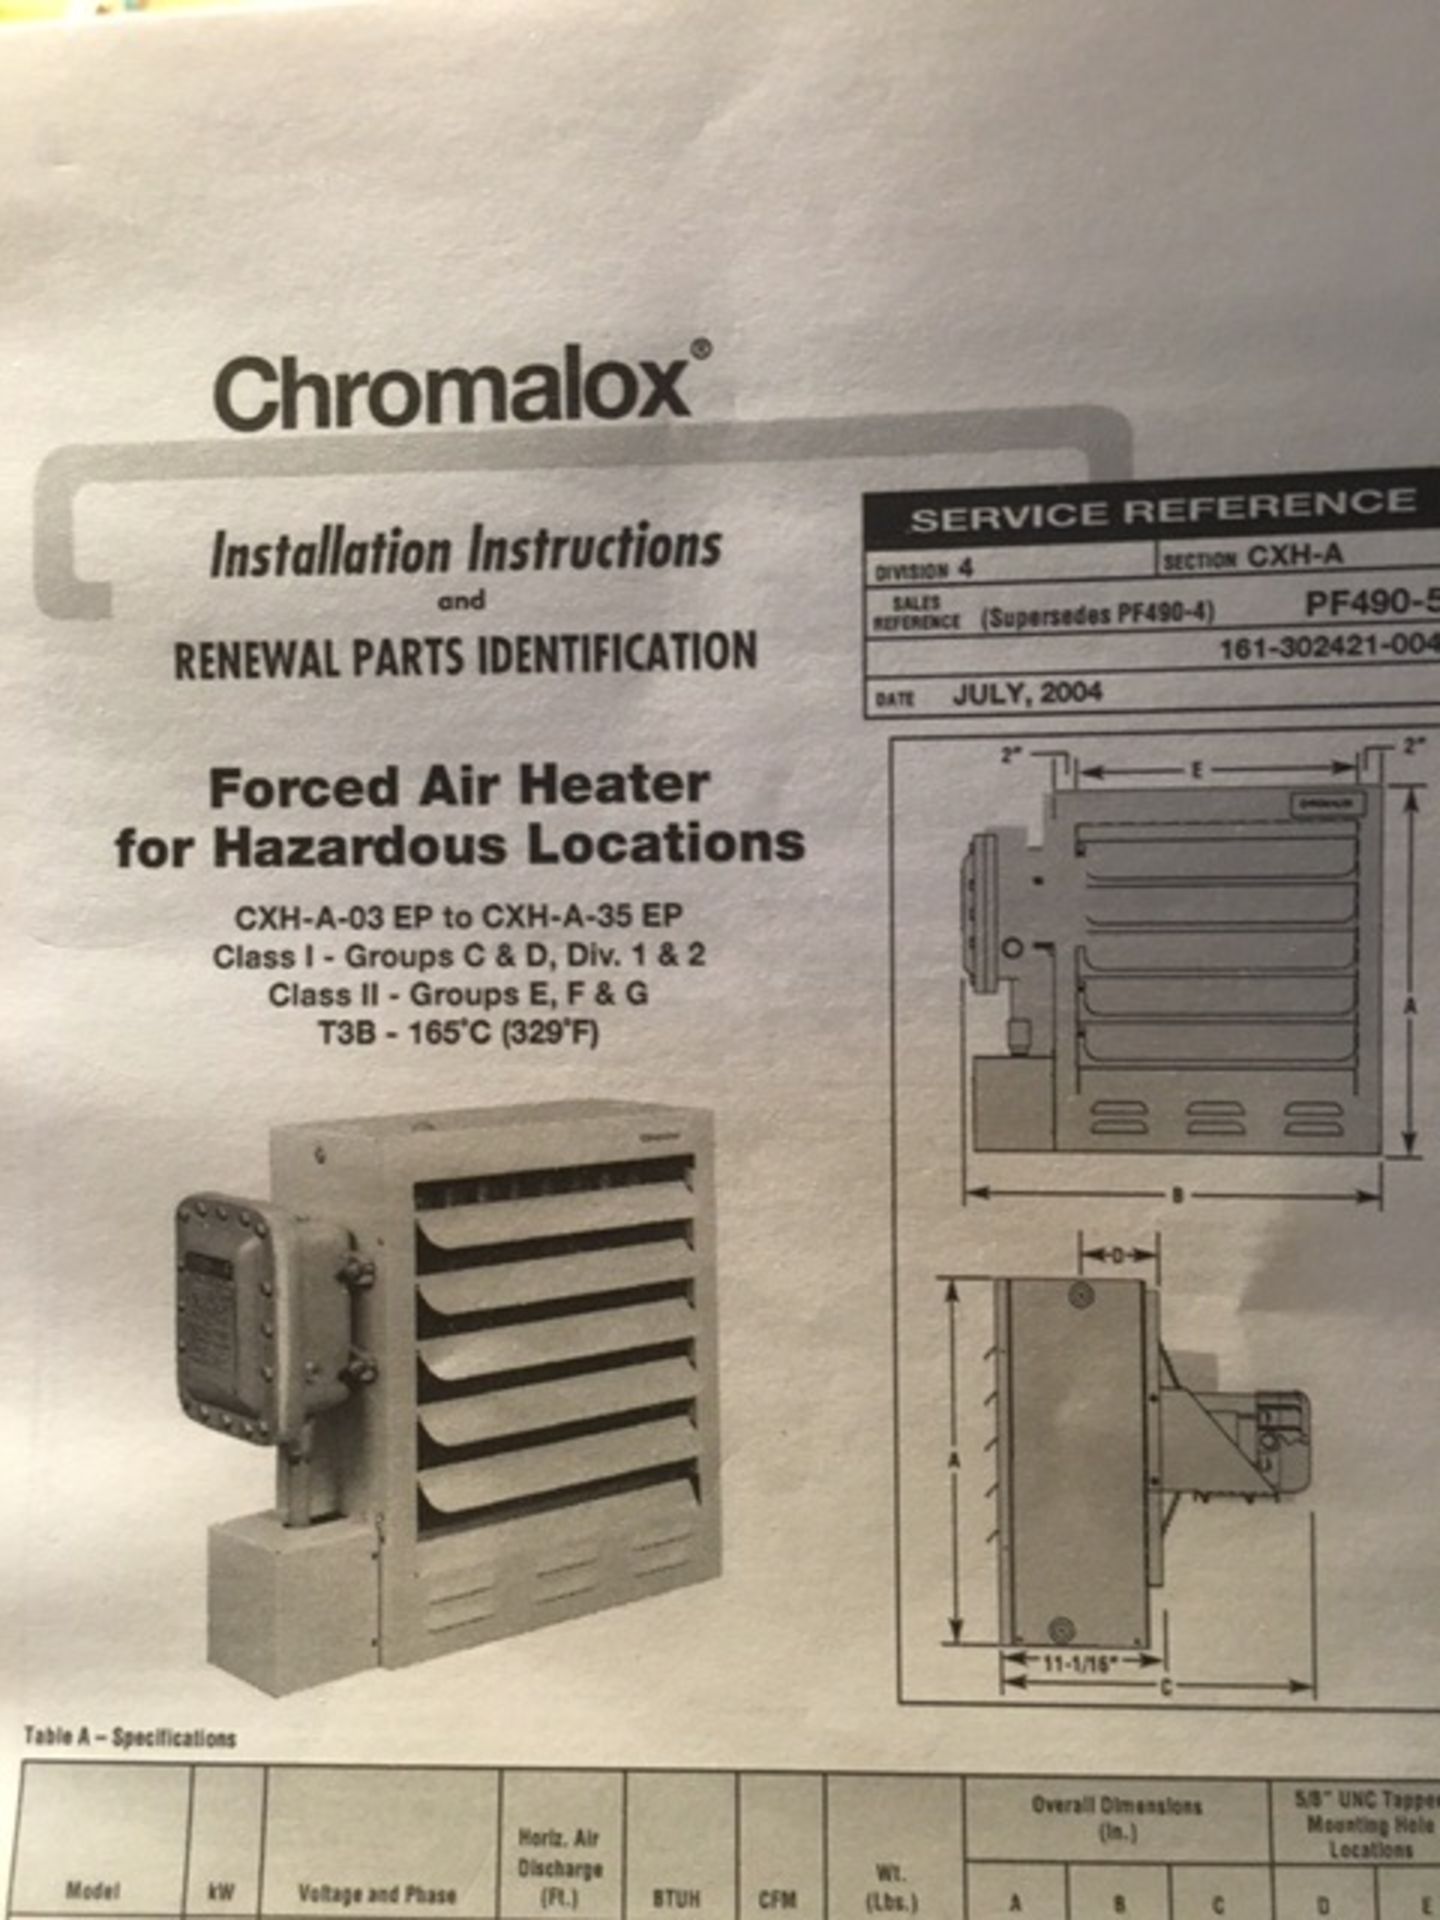 CHROMALOX Forced Air Heater, Explosion Proof - Mod: CXH-A-10-63-32-40-10-10-EP (full details below) - Image 3 of 4